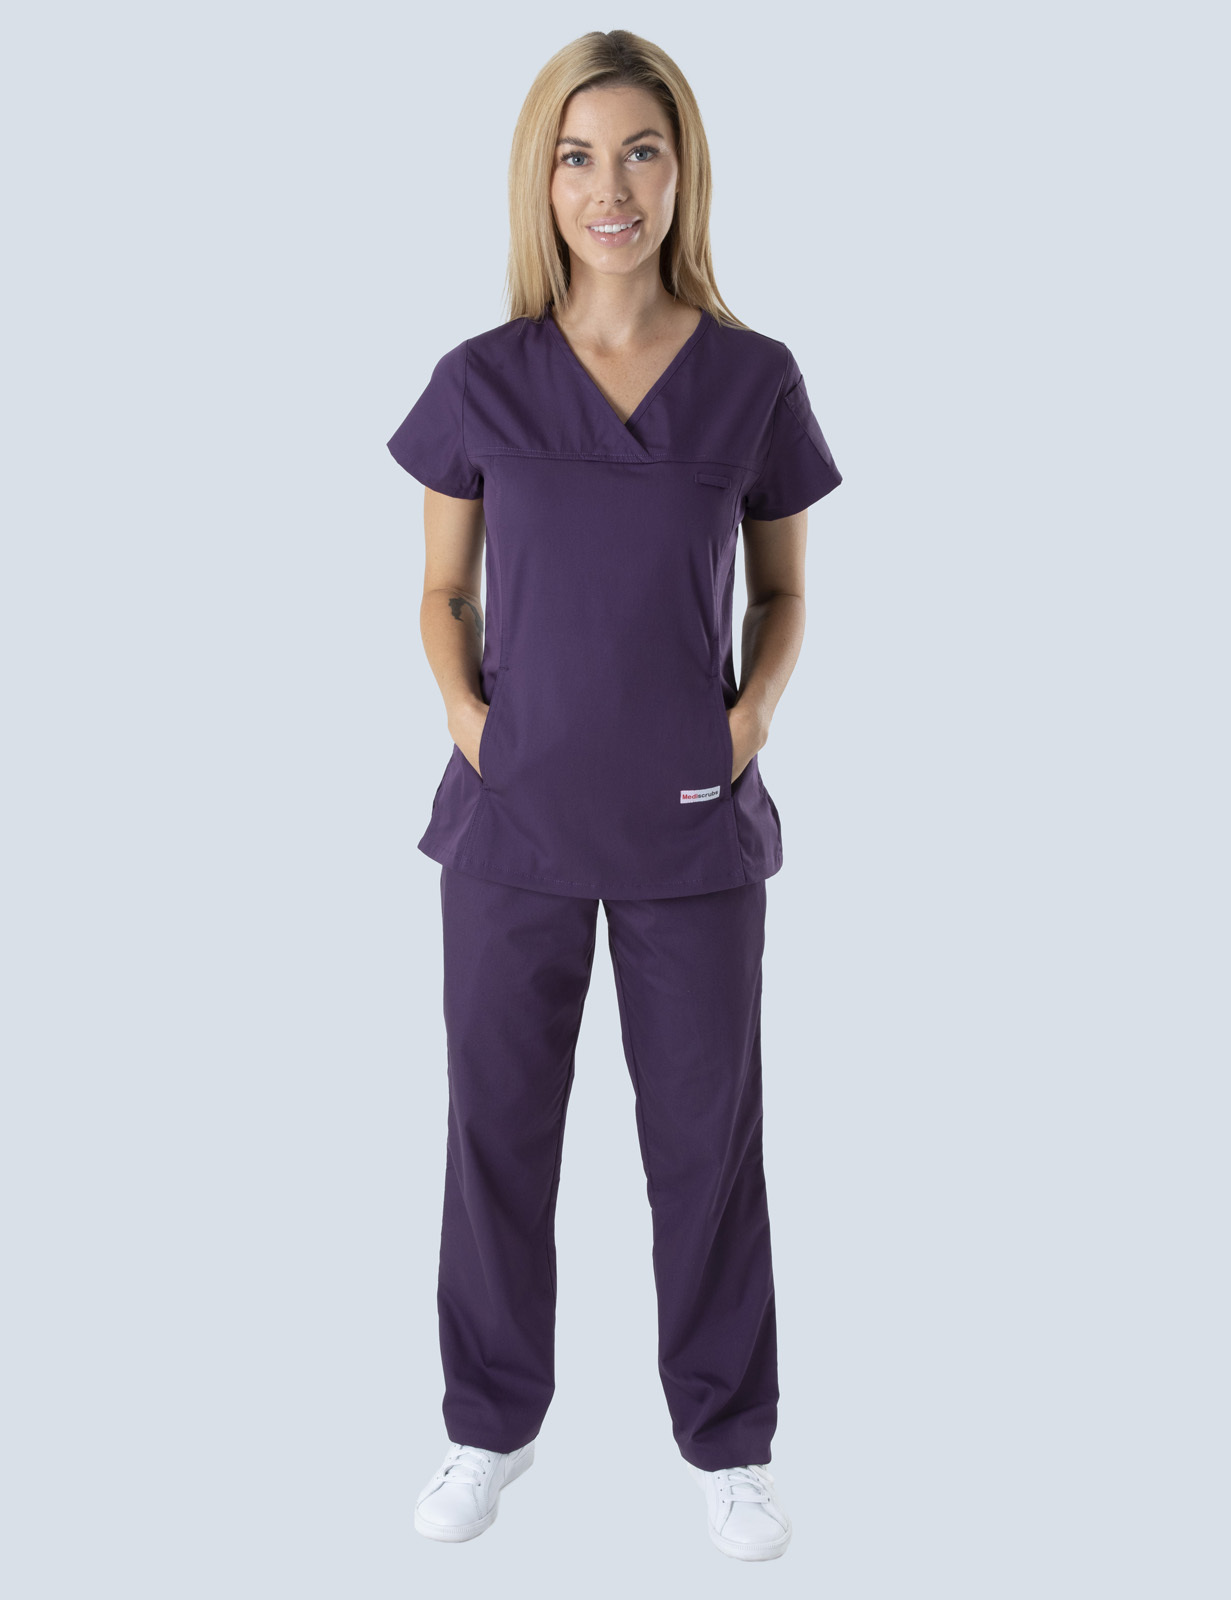 Hopevale Primary Health - CN (Women's Fit Solid Scrub Top and Cargo Pants in Aubergine incl Logos)